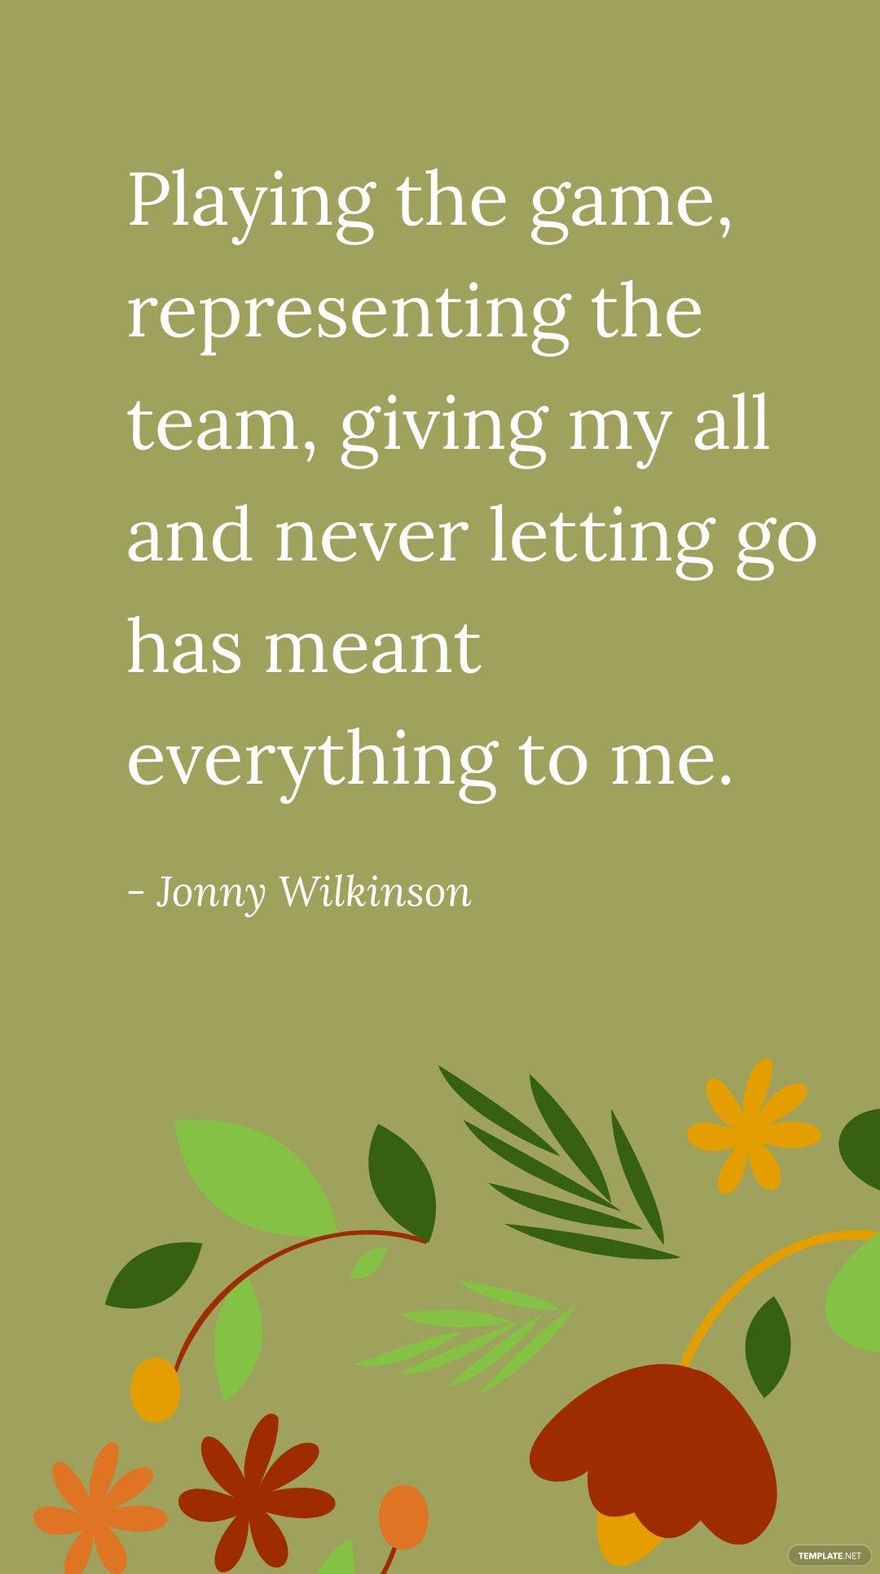 Jonny Wilkinson - Playing the game, representing the team, giving my all and never letting go has meant everything to me. in JPG